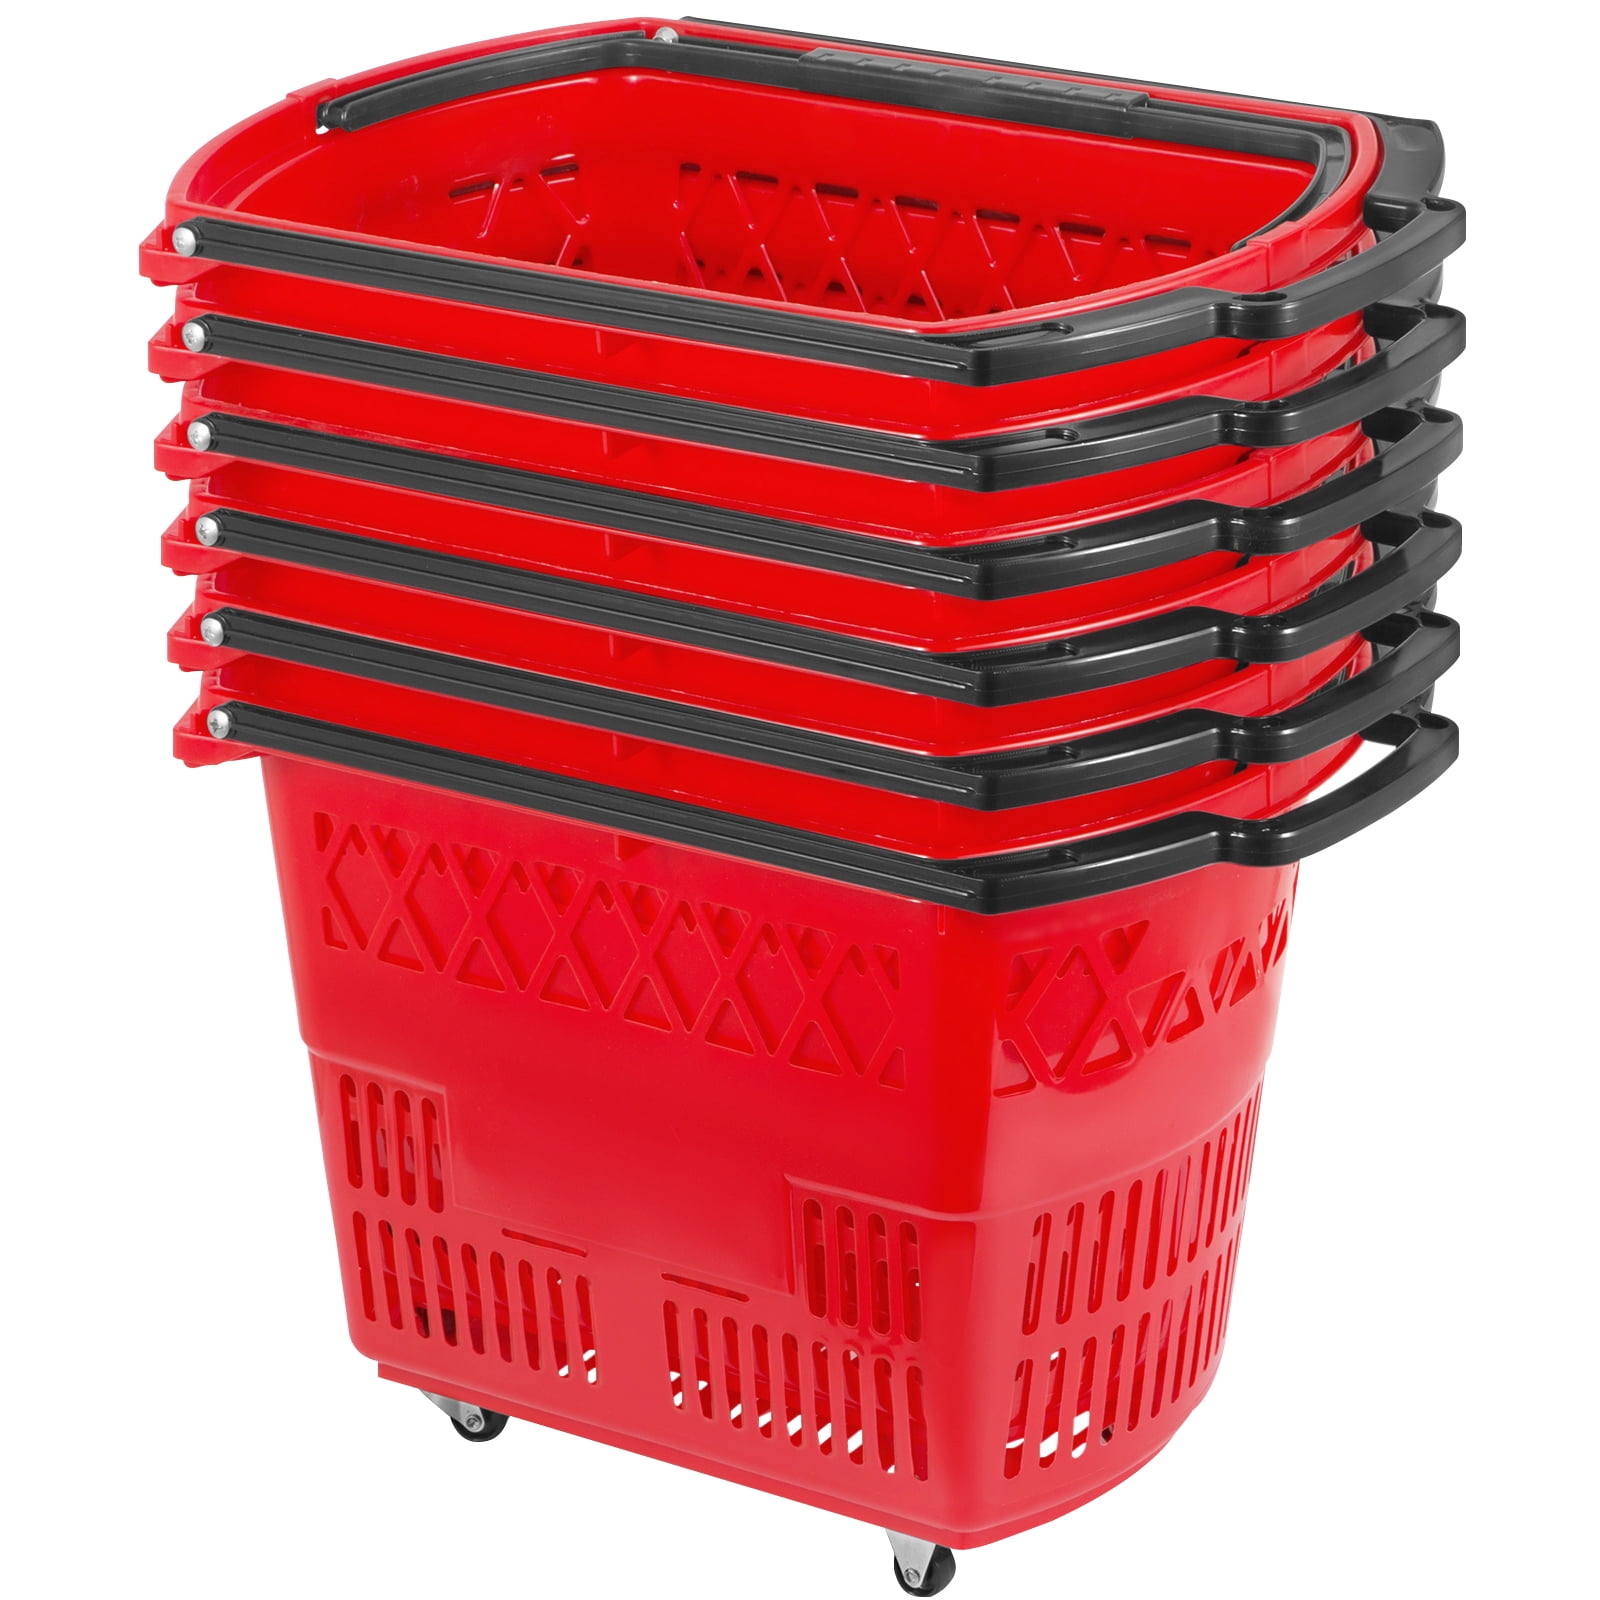 Single Basket Mini Shopping Cart Black Frame with Red Handle 